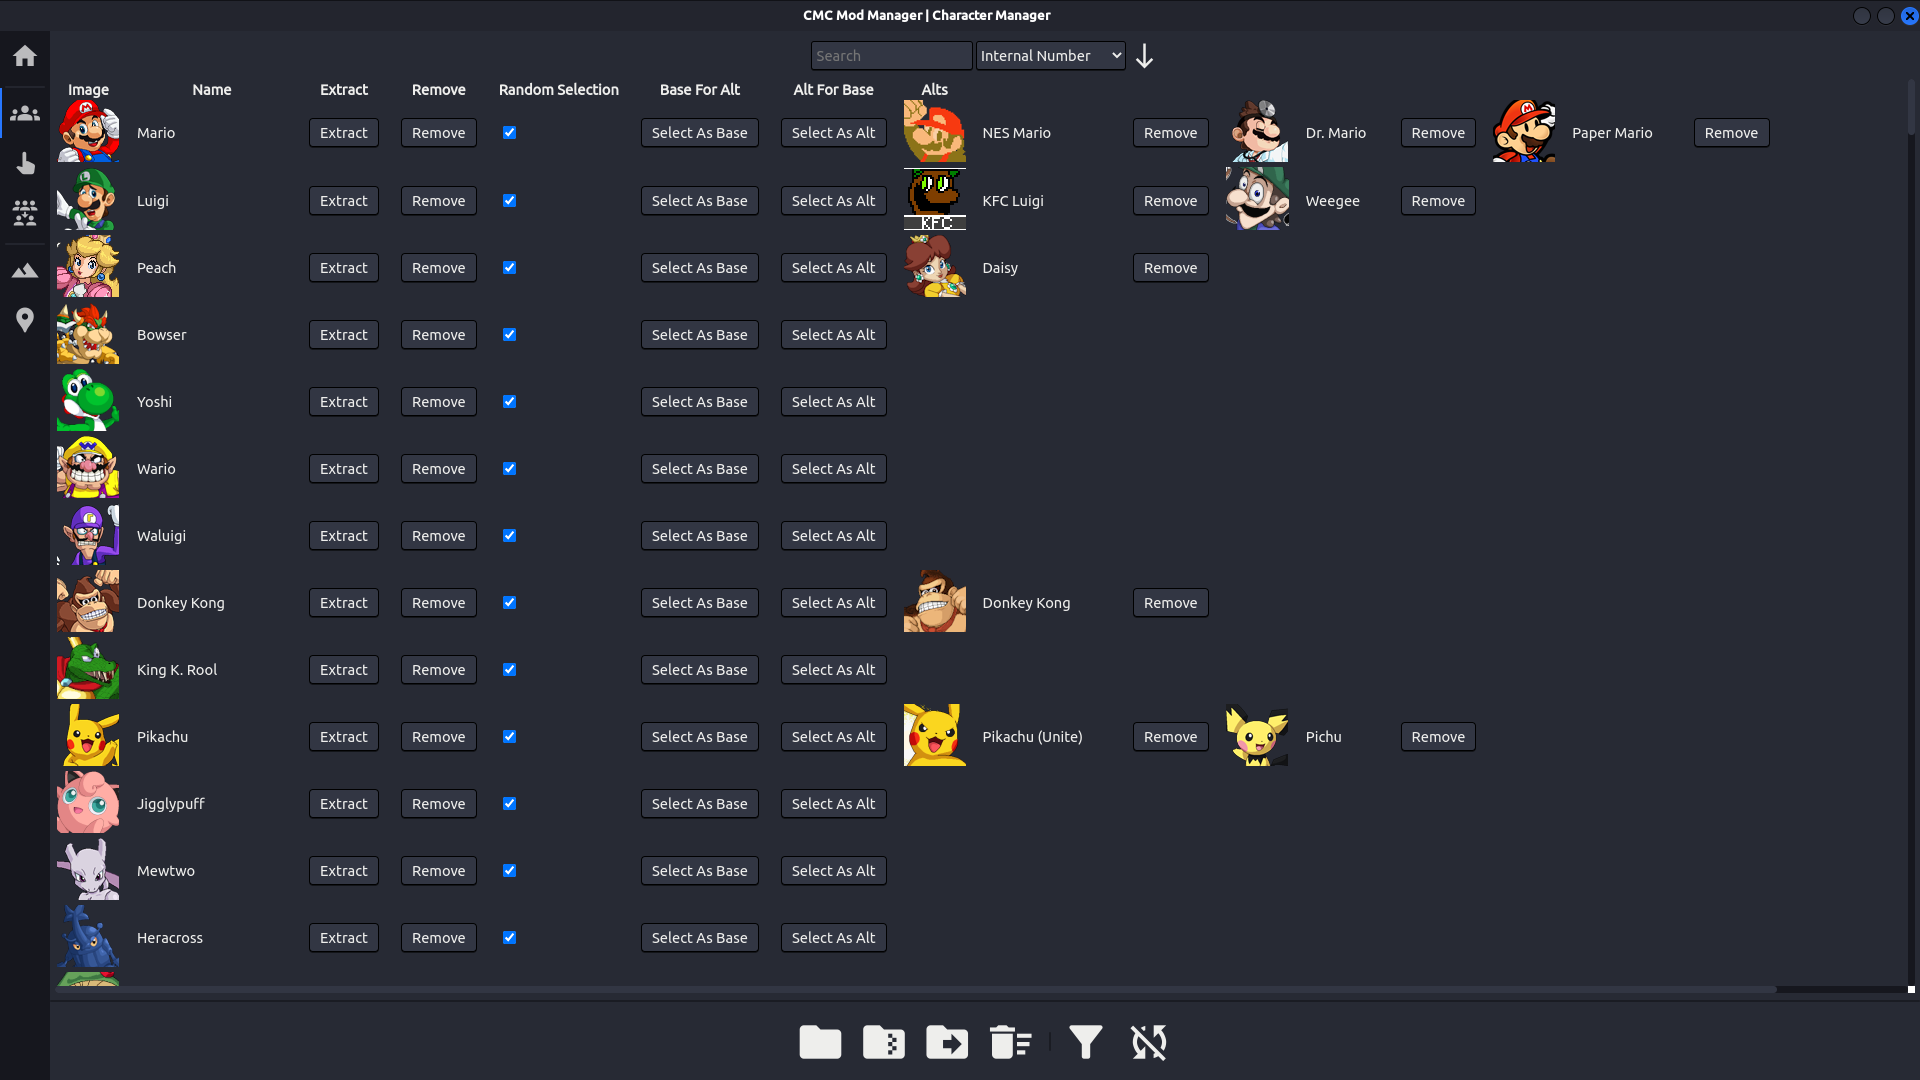 A screenshot of CMC Mod Manager's Character Management tab